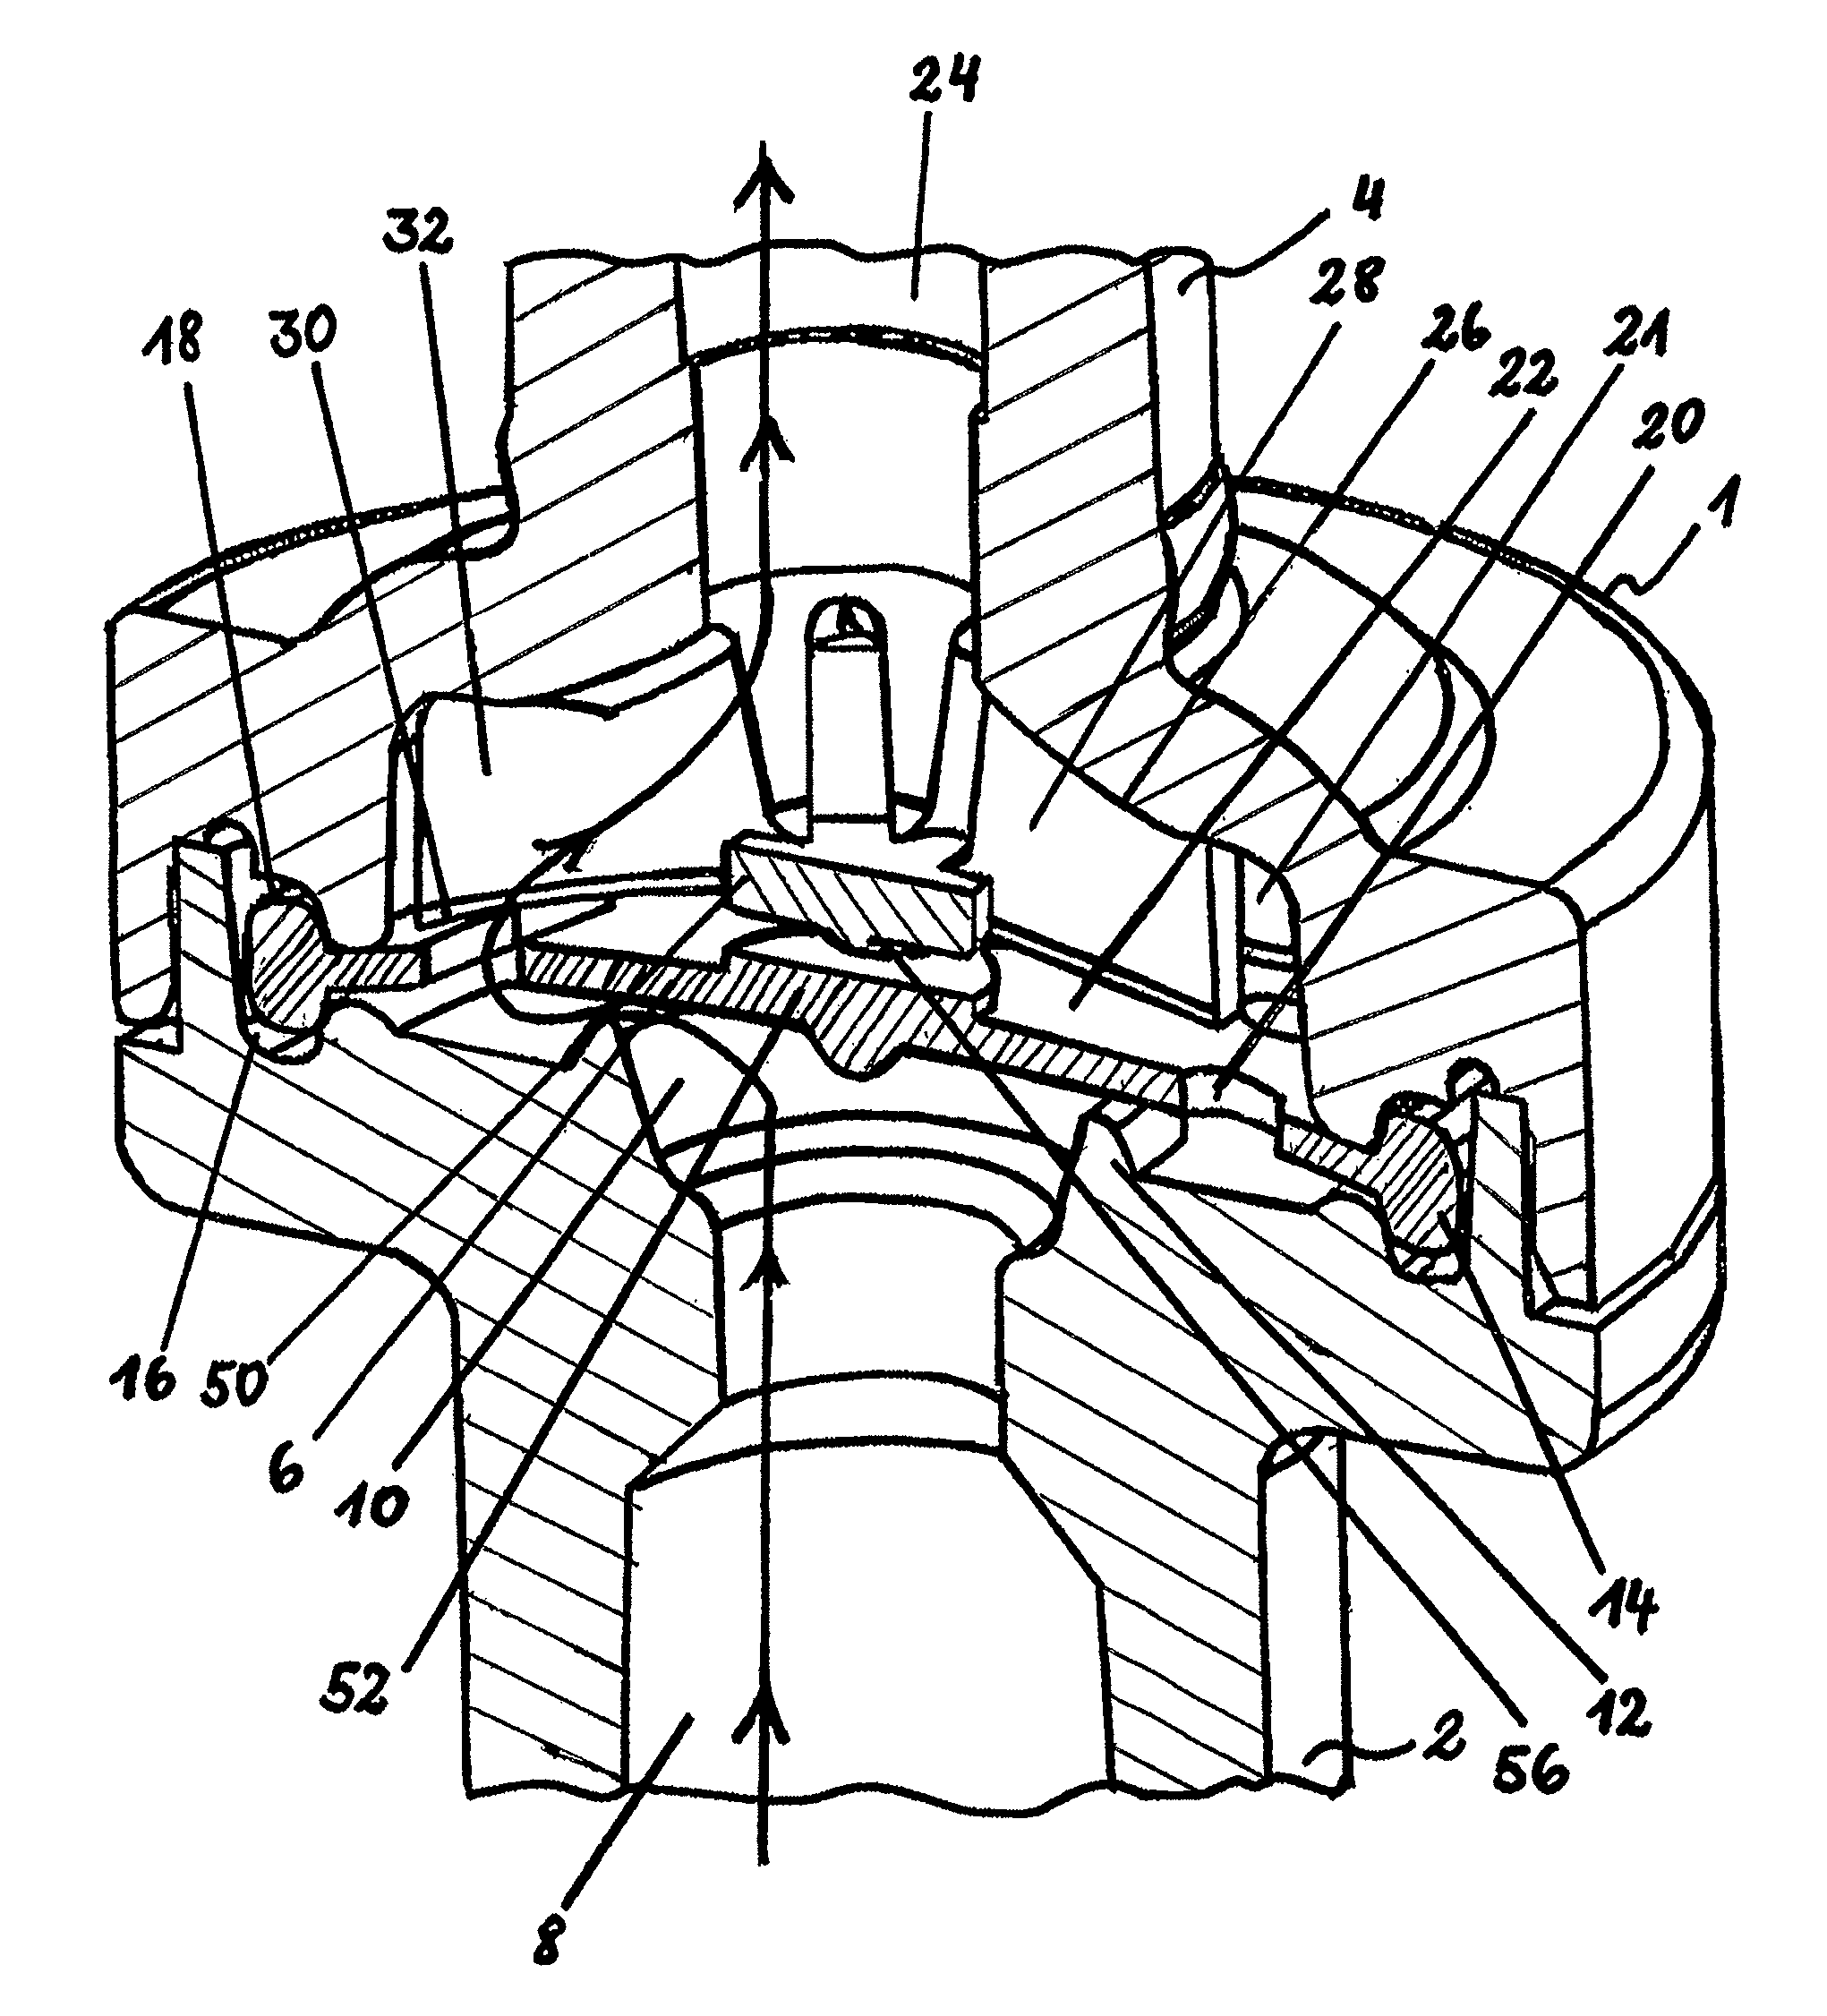 Non-return valve, in particular for medical uses